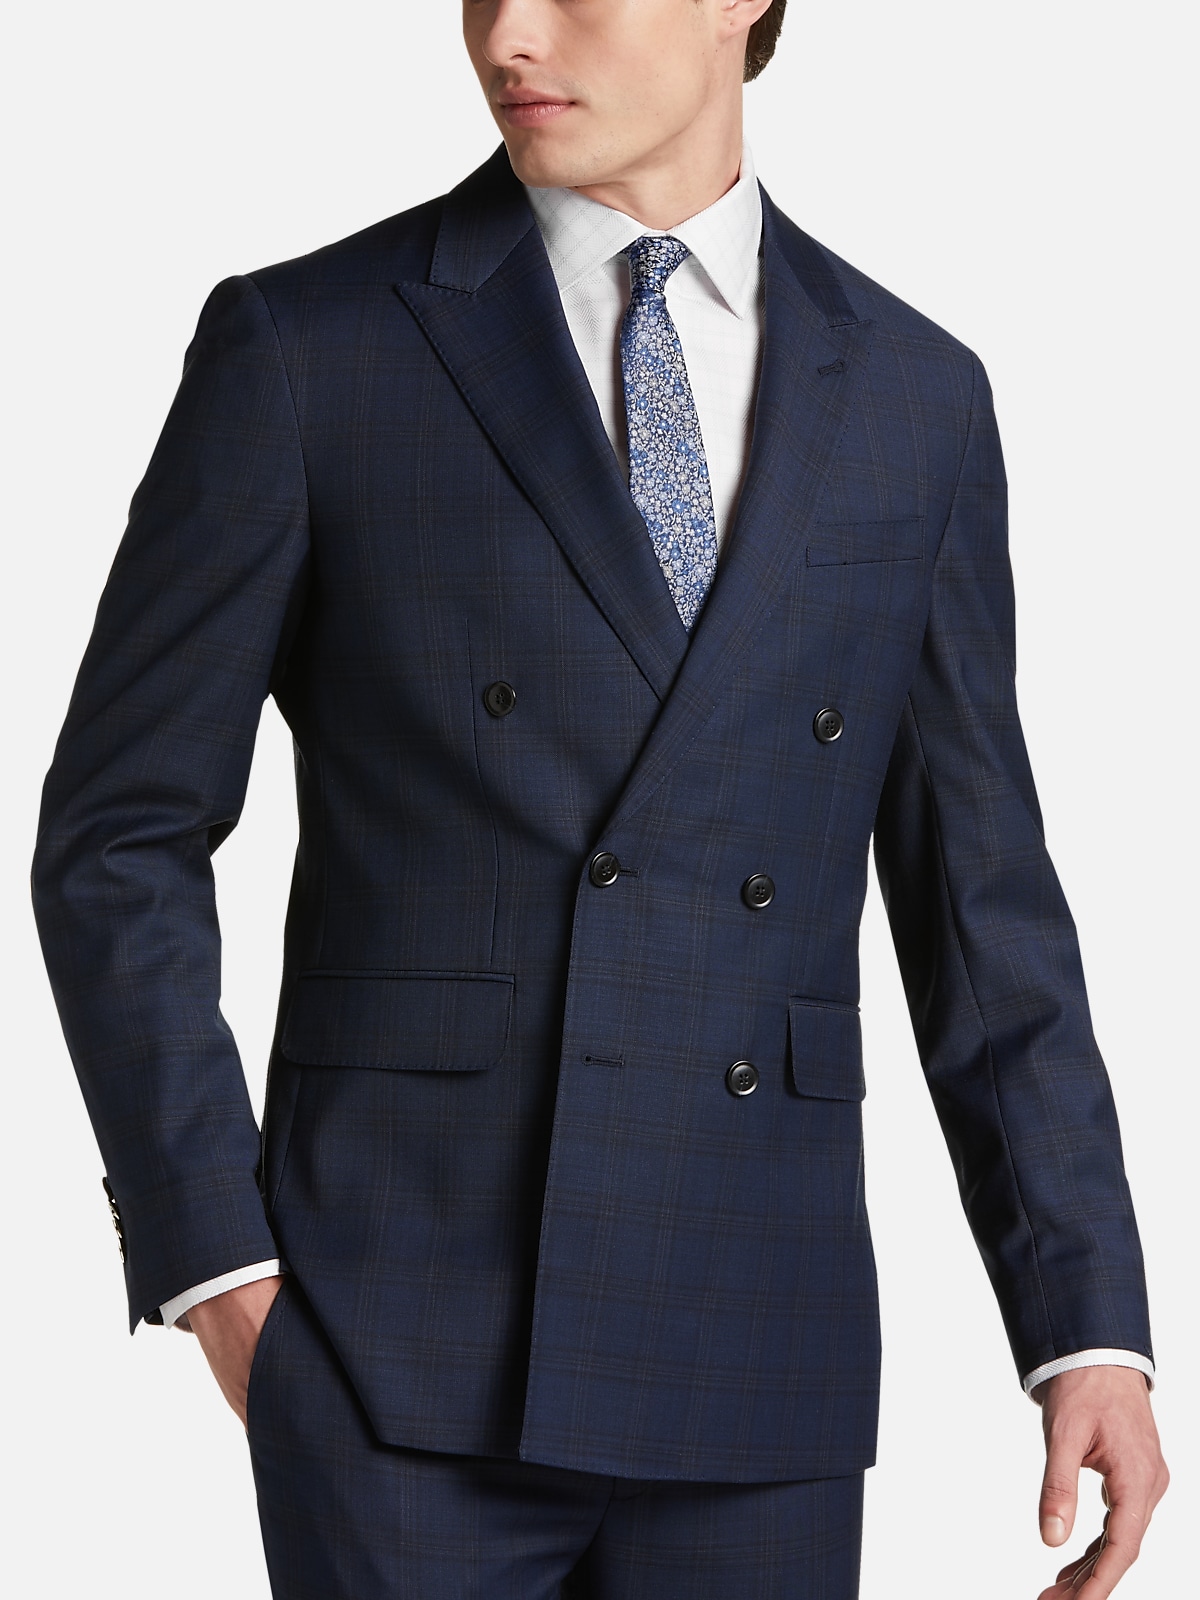 2 Piece Men's Denim Suit In Blue Double-Breasted Jacket Slim Fit Tailored  Pants